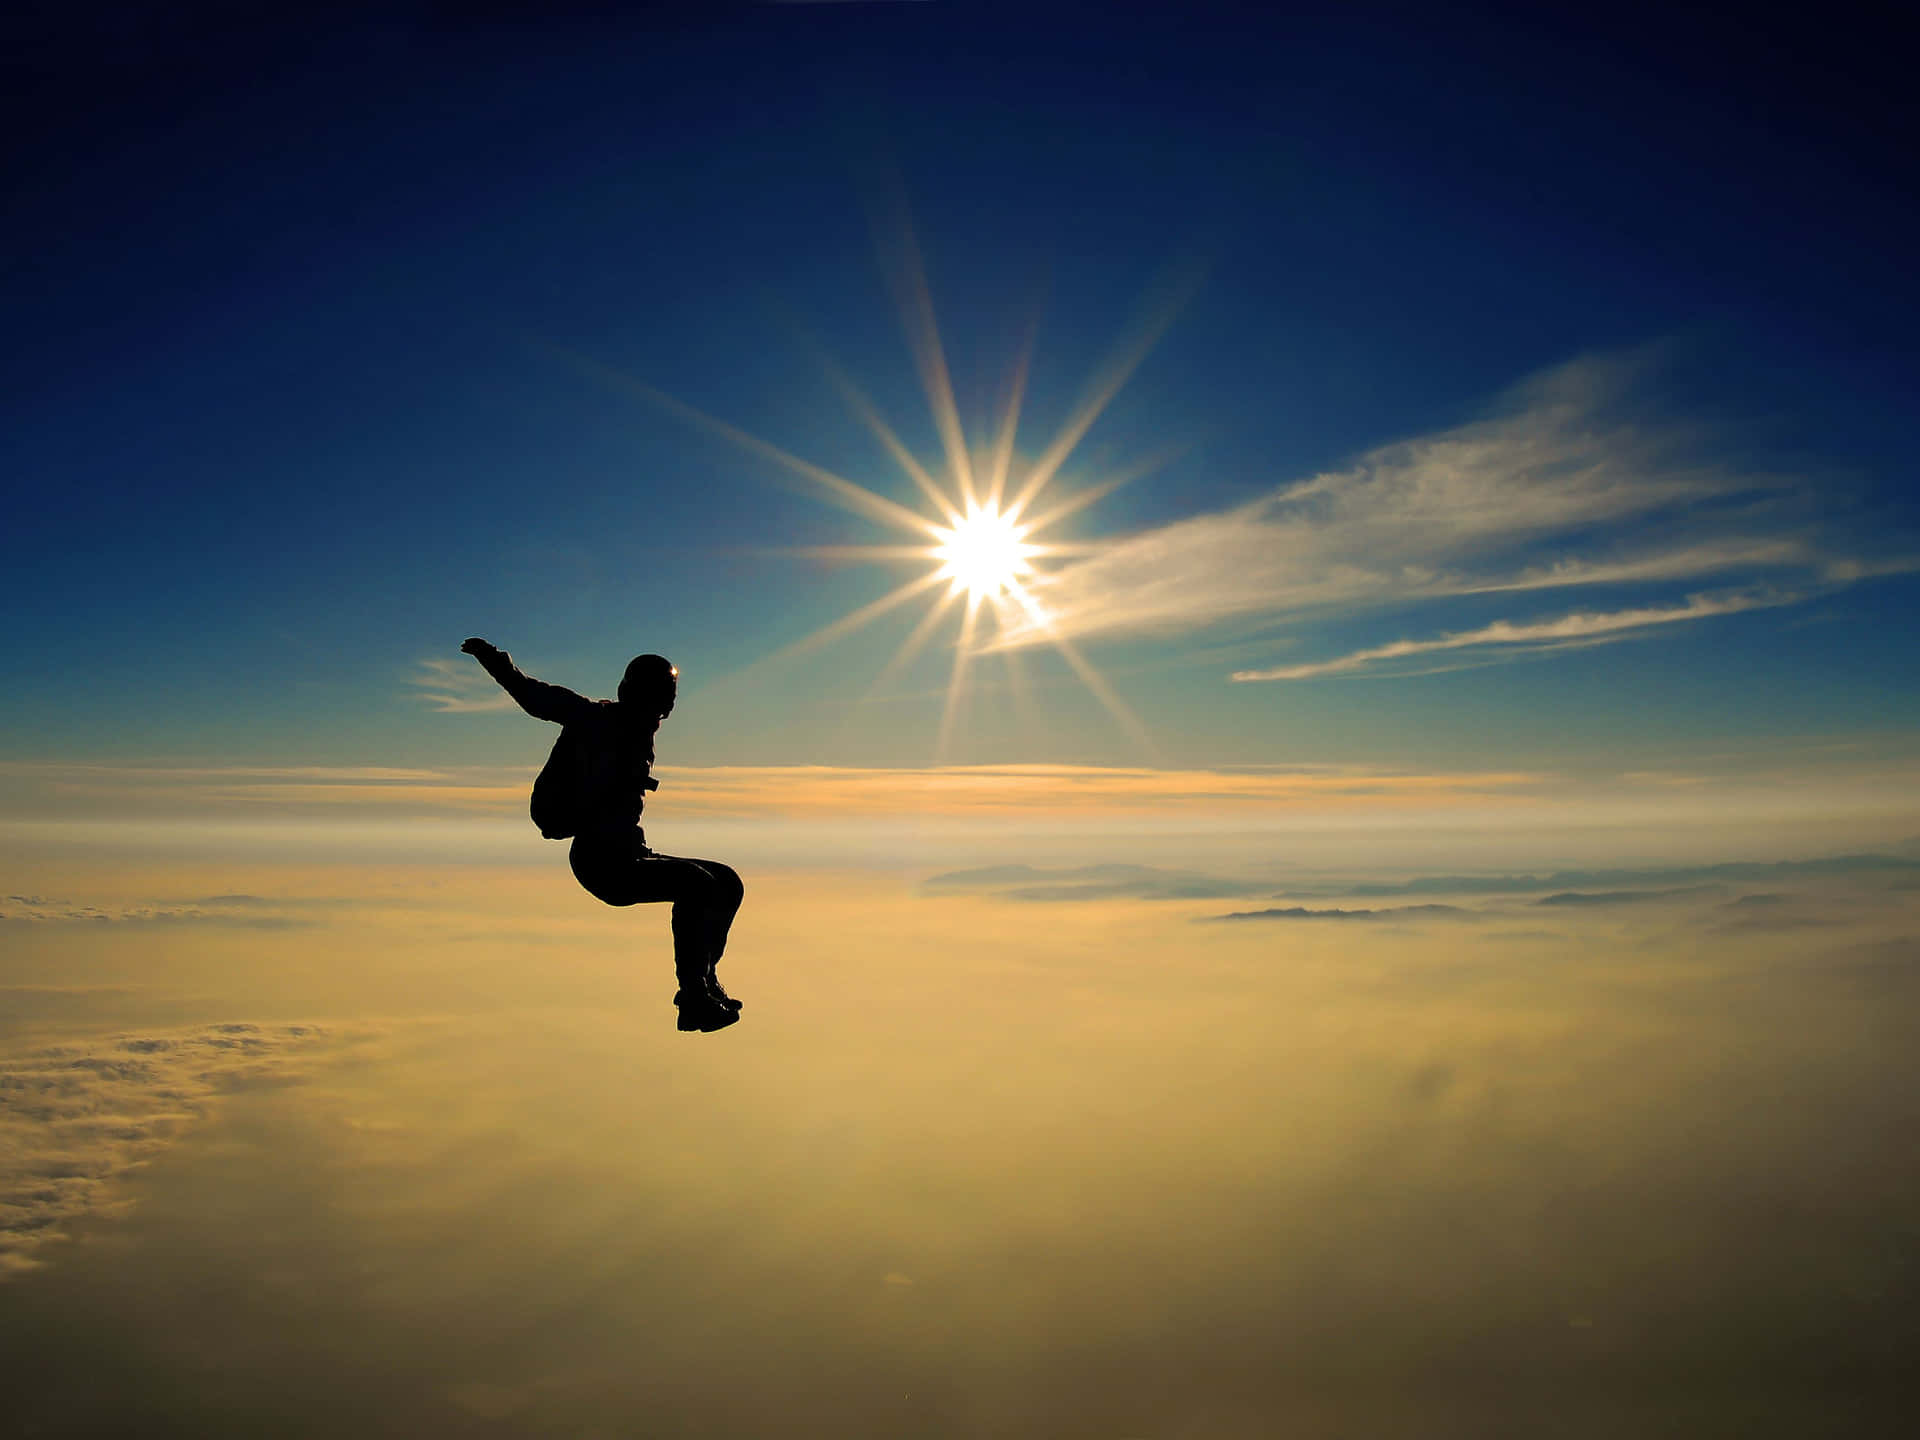 Freefall Skydiving Silhouette Magnificent Sky View Wallpaper